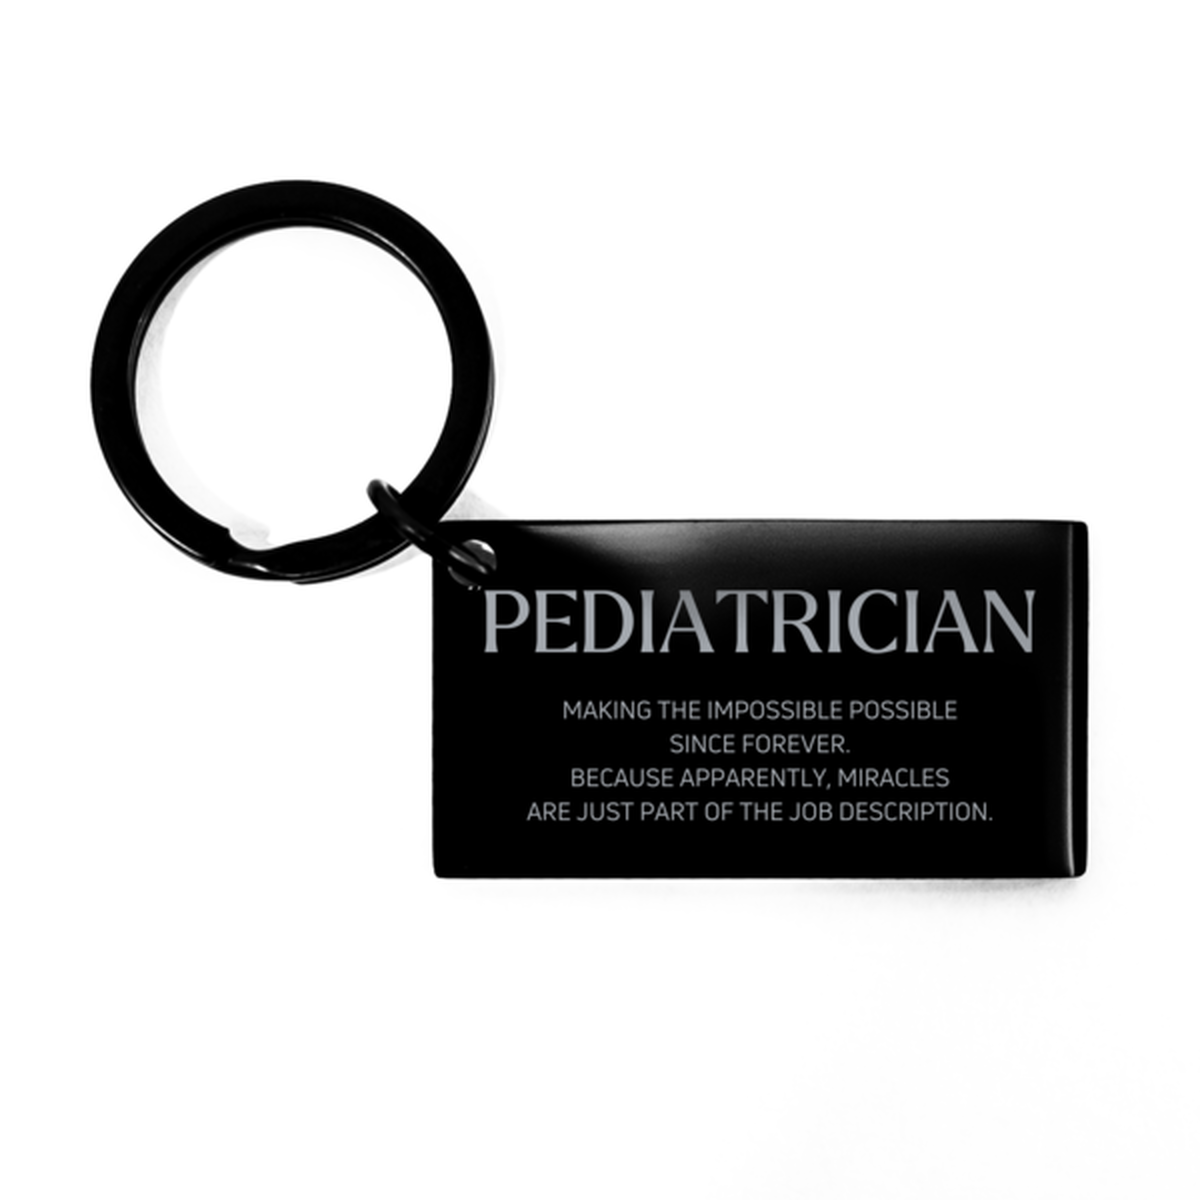 Funny Pediatrician Gifts, Miracles are just part of the job description, Inspirational Birthday Keychain For Pediatrician, Men, Women, Coworkers, Friends, Boss